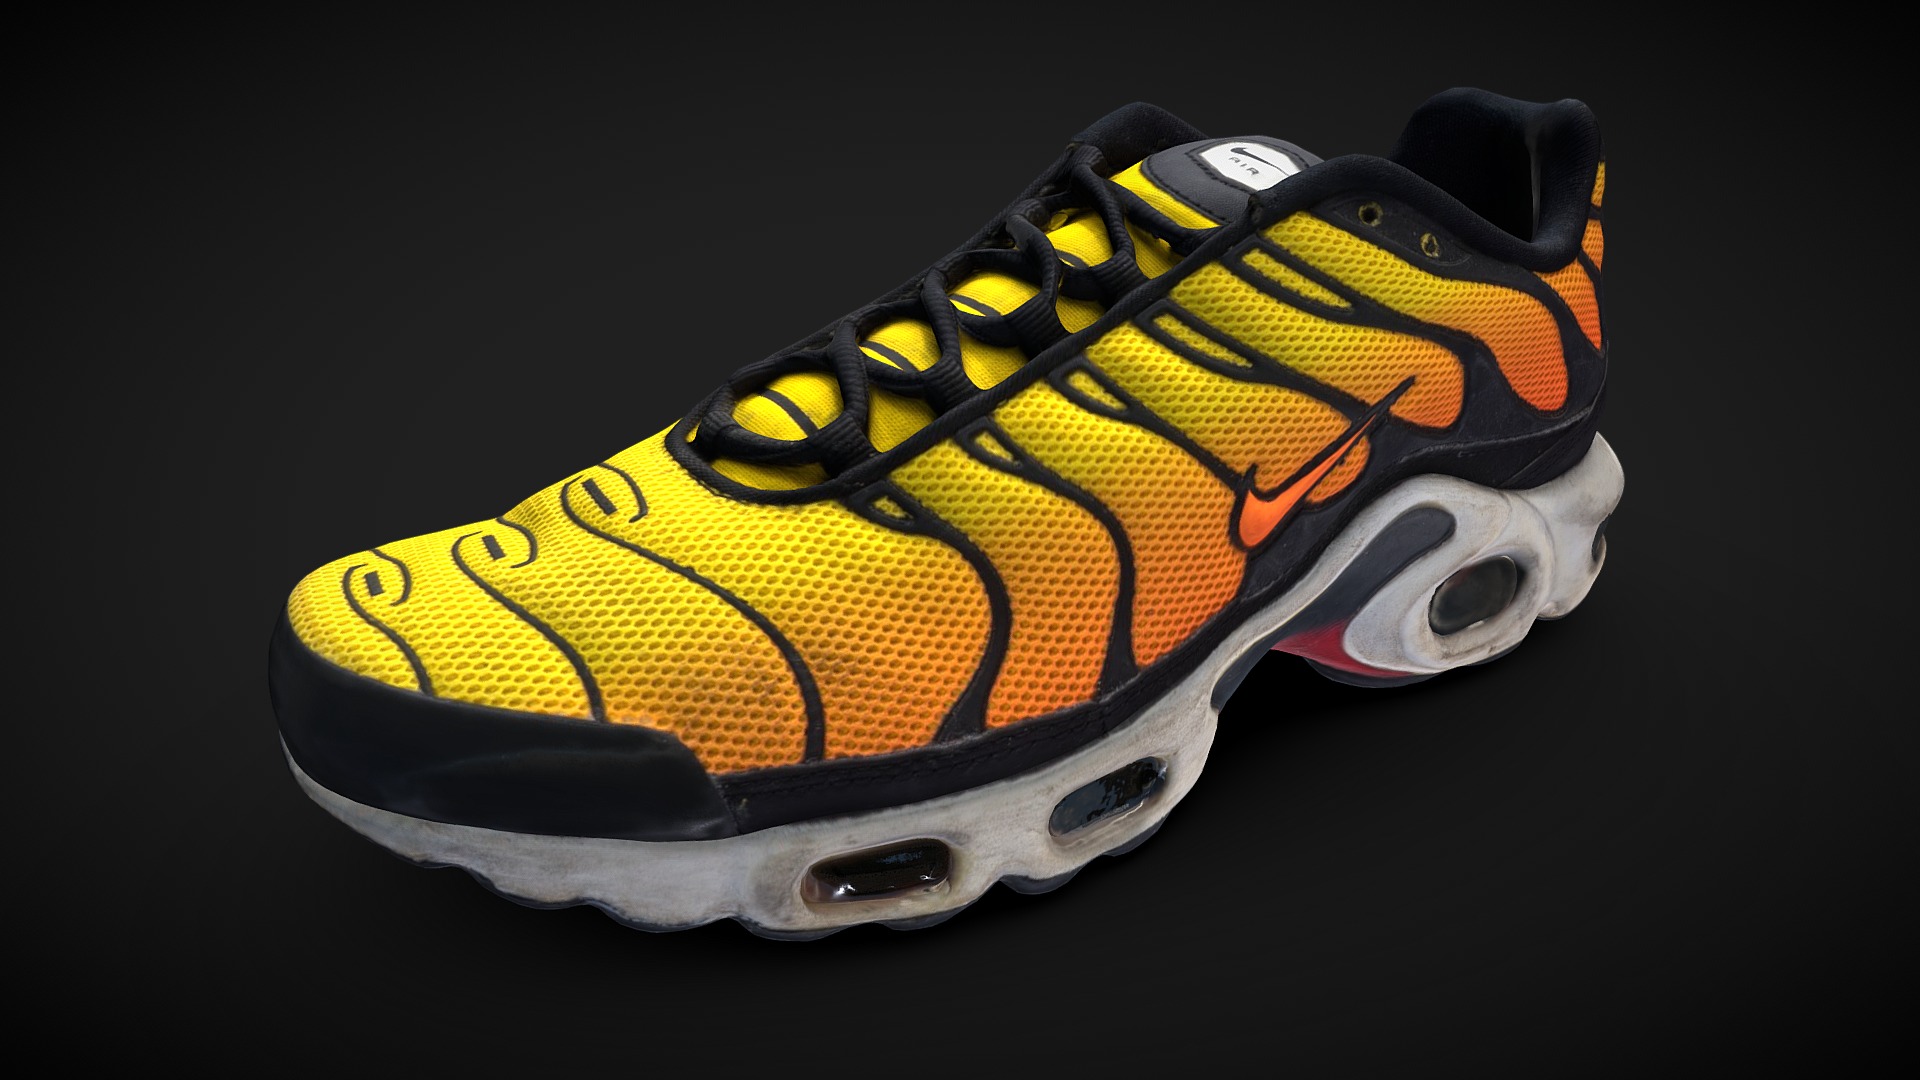 3D model Nike Shoe Study 2 - This is a 3D model of the Nike Shoe Study 2. The 3D model is about a black and yellow shoe.